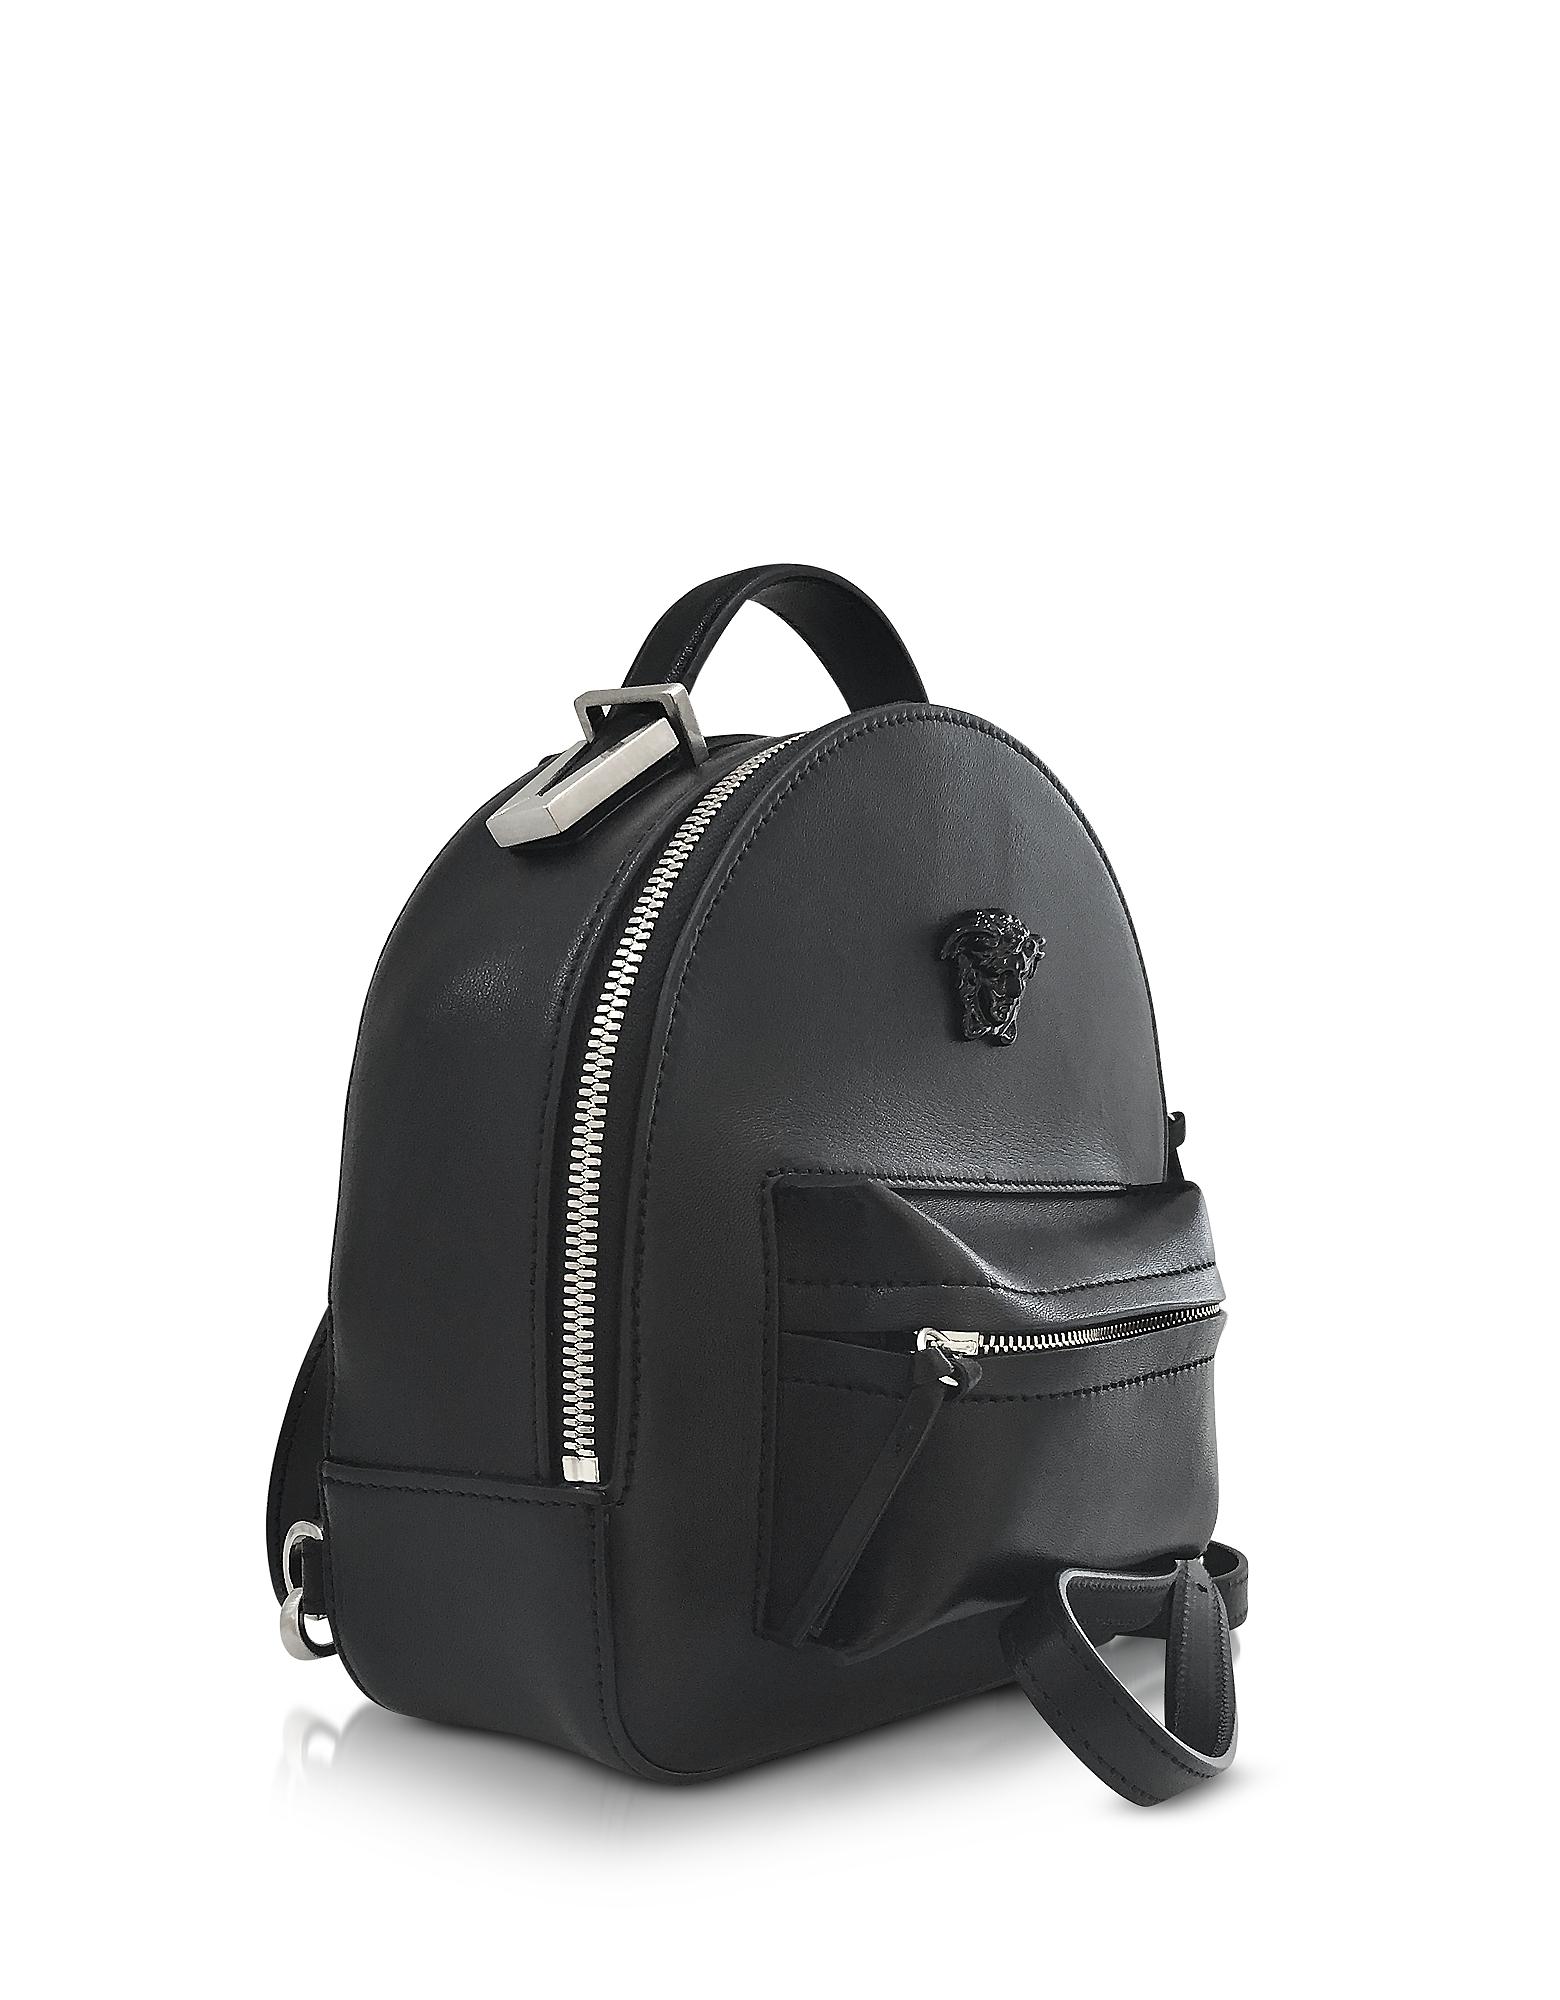 Lyst - Versace Palazzo Black Leather Mini Backpack in Black